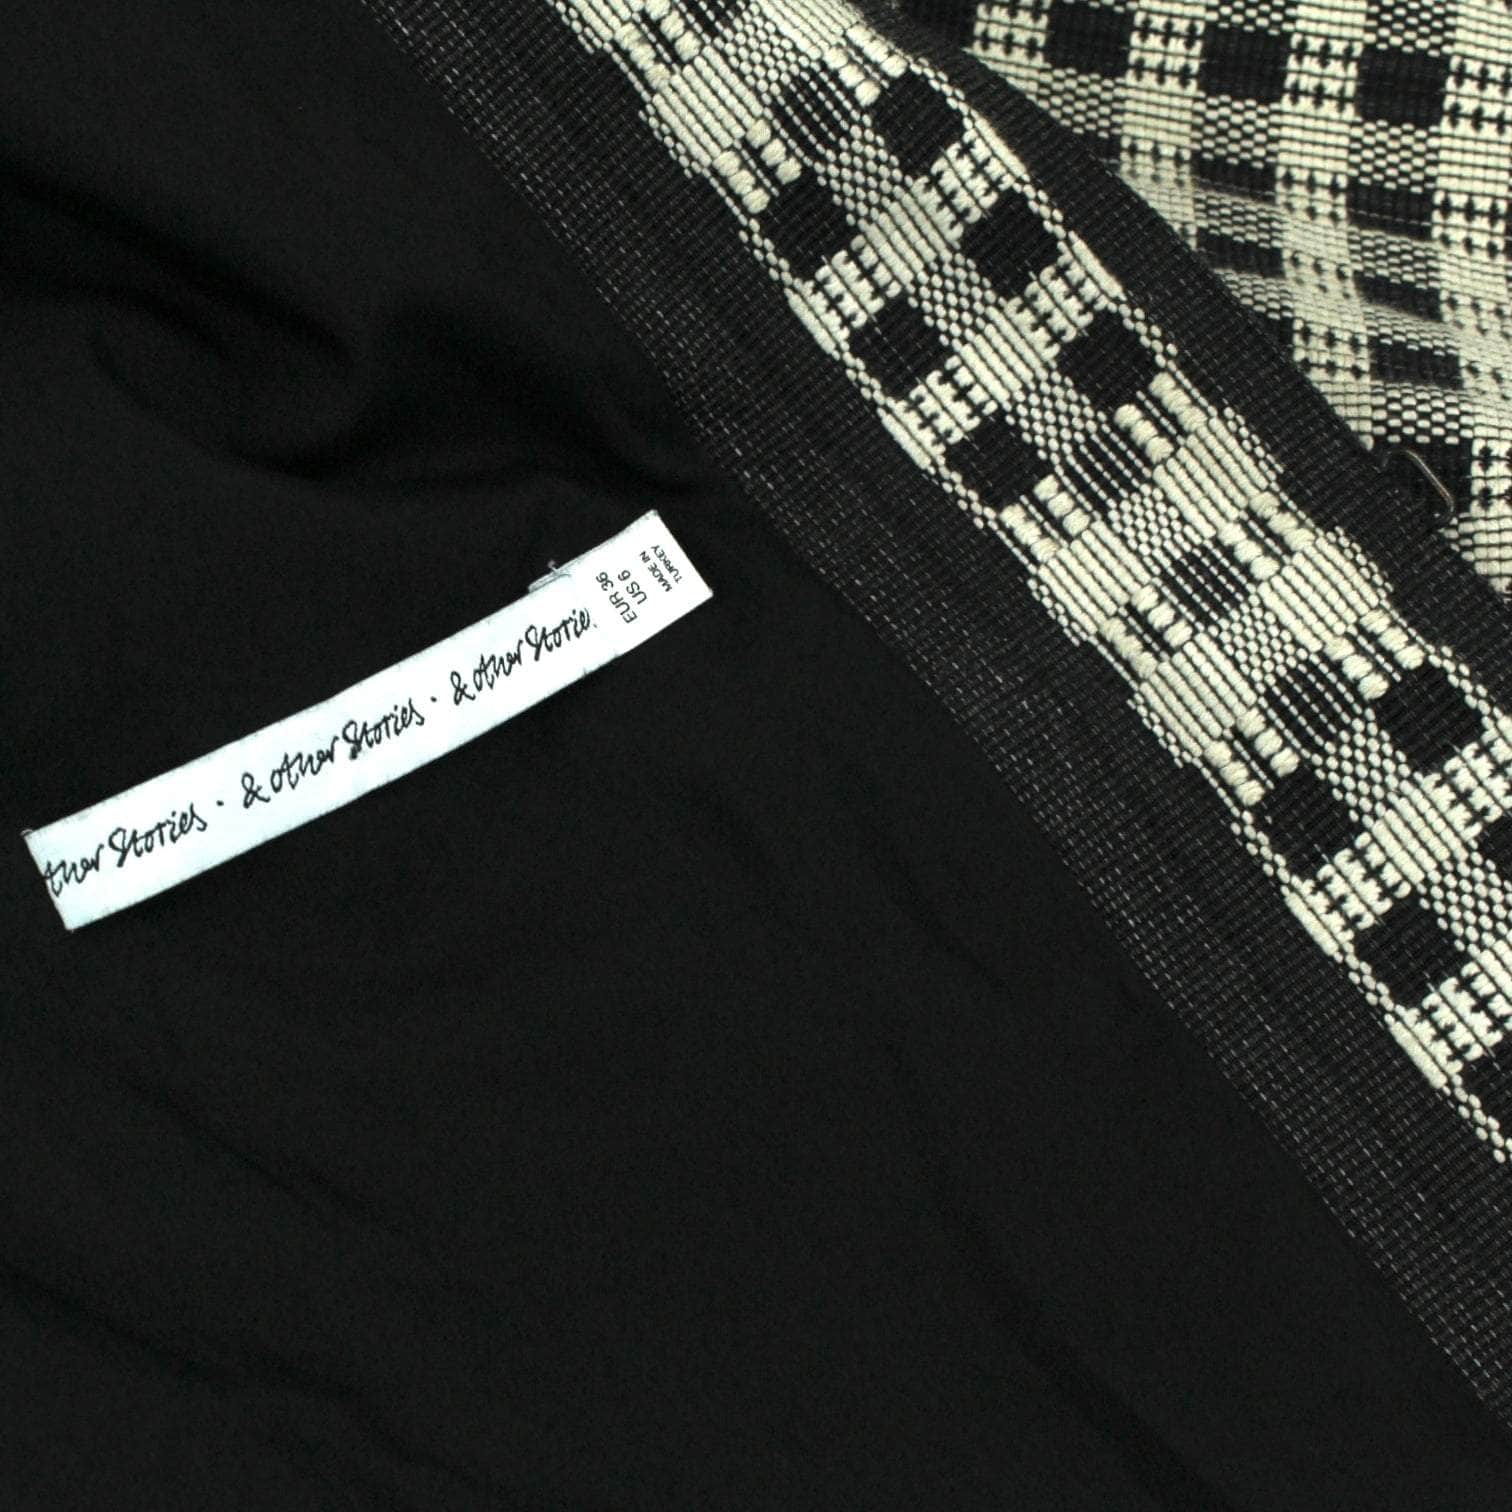 & Other Stories Black & White Check Coat